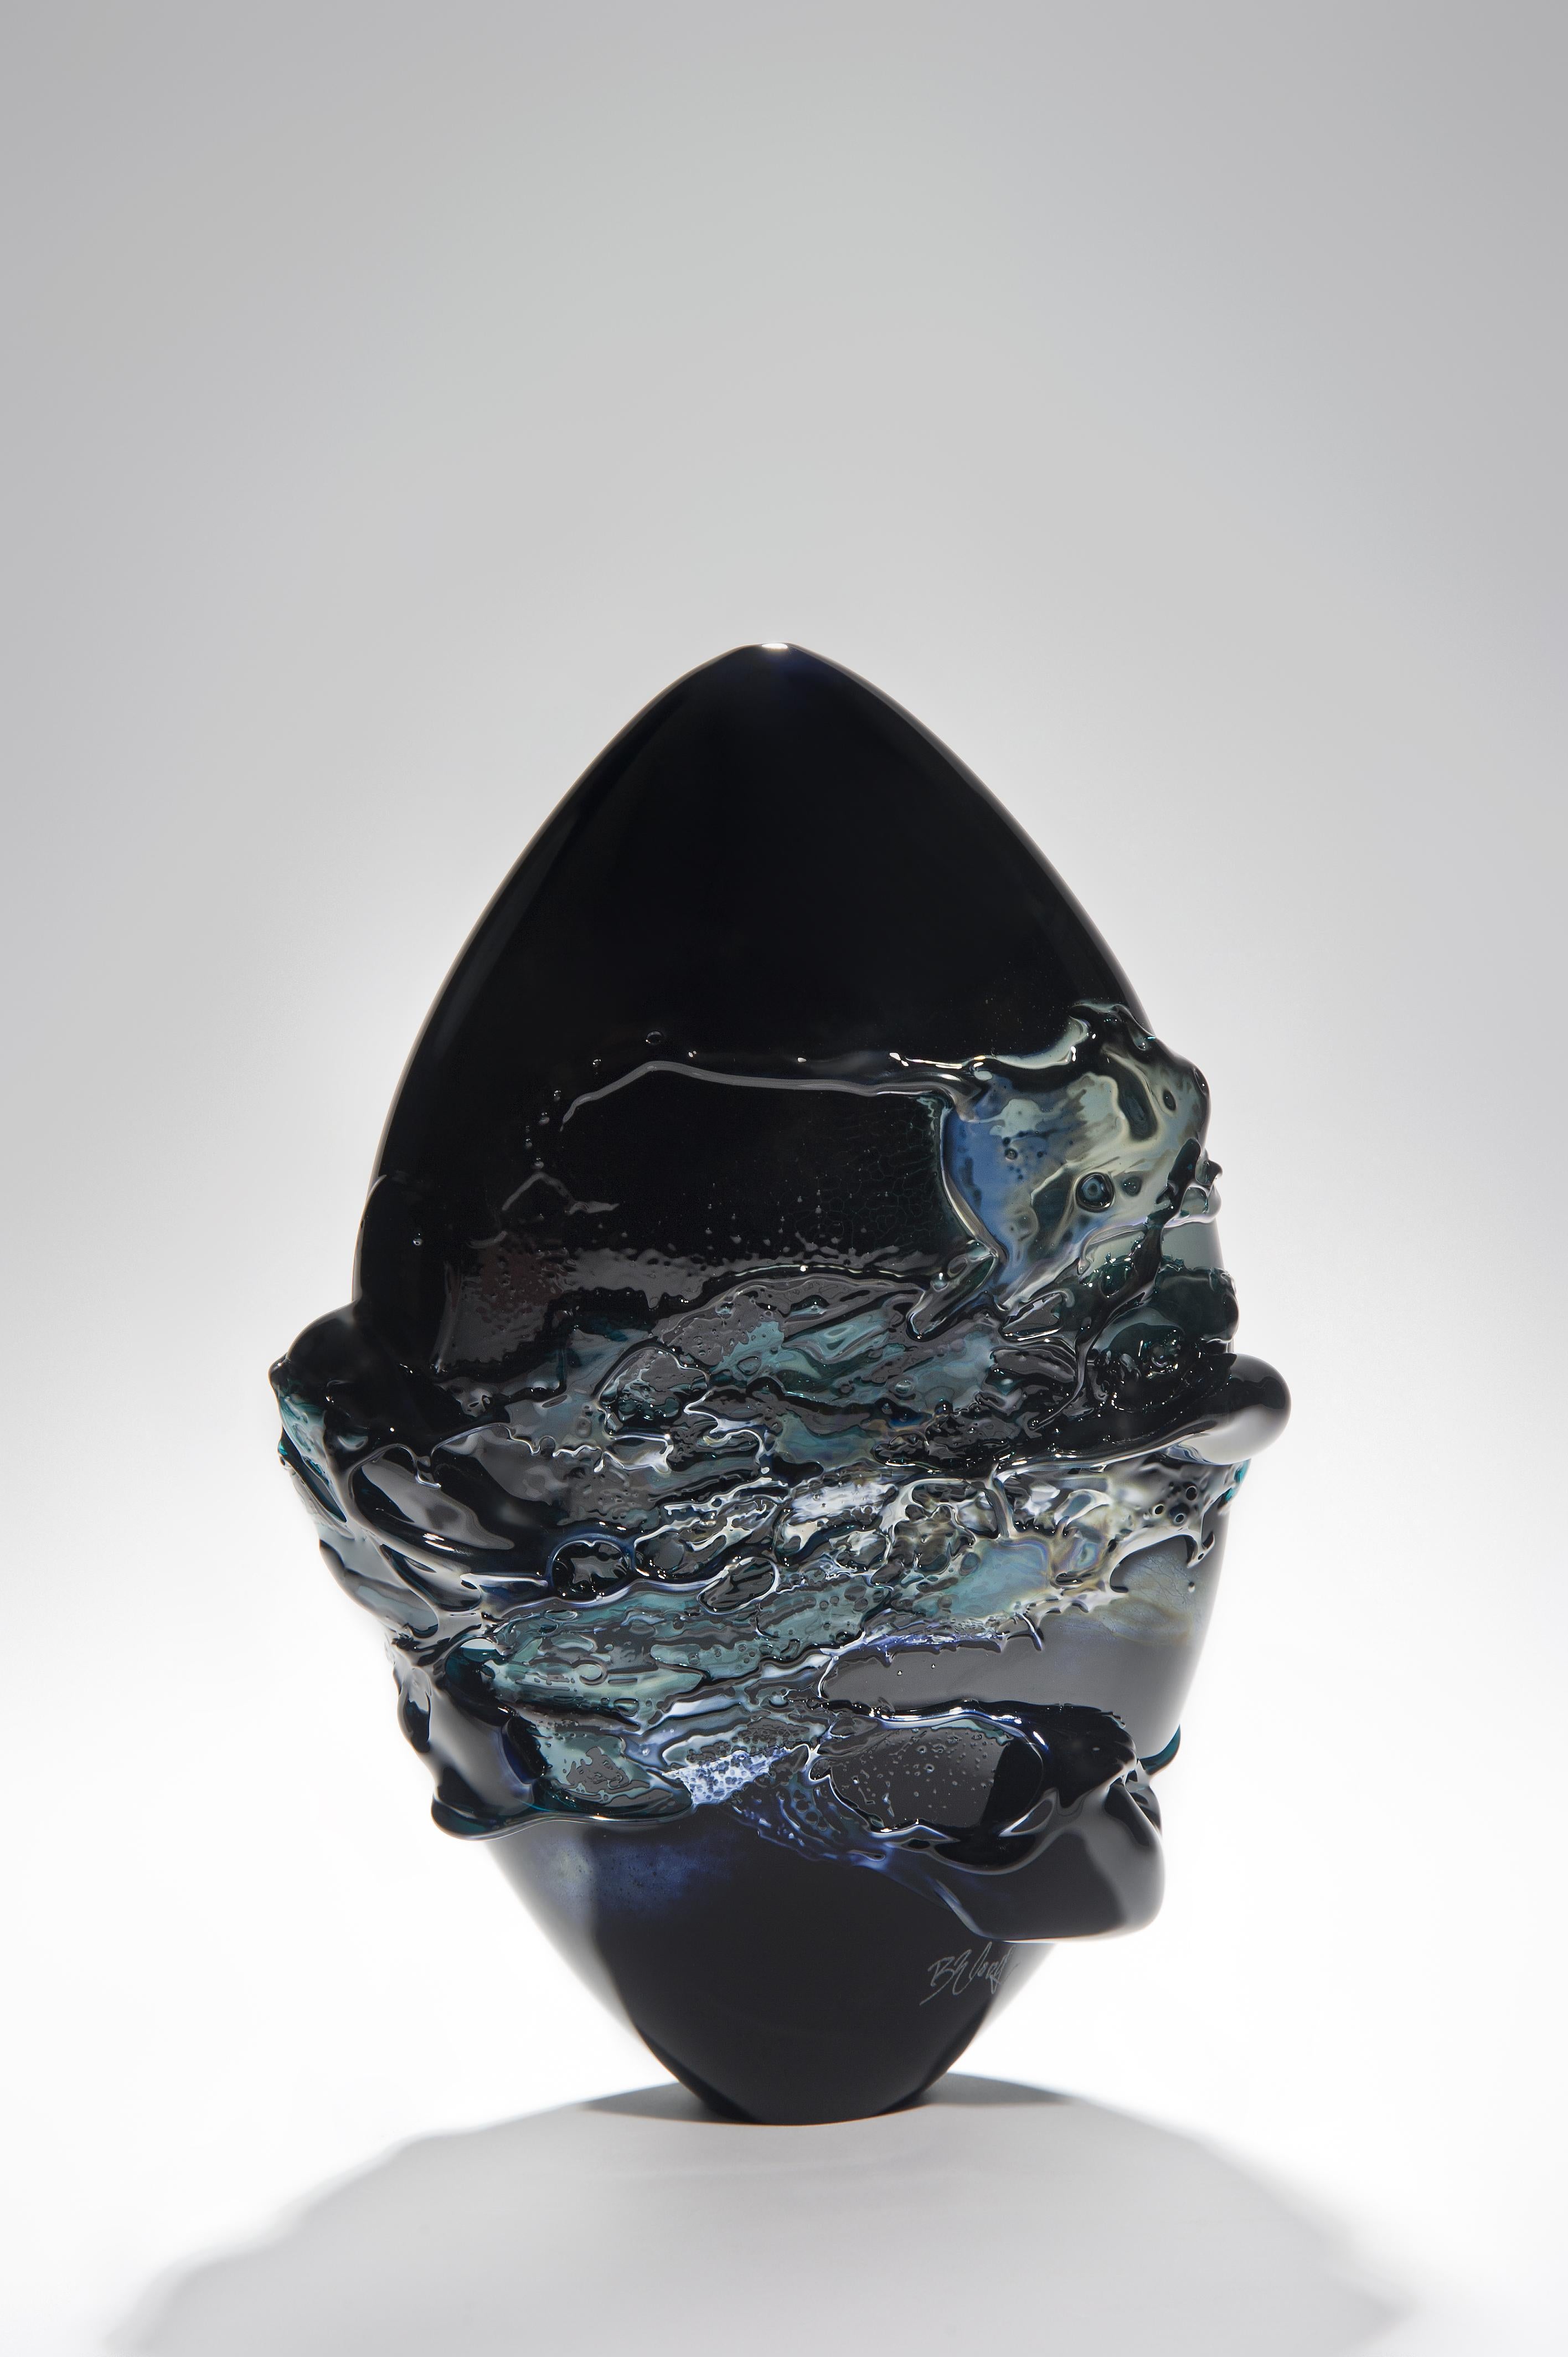 Black Sea is a unique black, blue and metallic sheen glass vase from the Molten Landscapes collection by the British artist Bethany Wood. An equal passion for painting physically inspires how she controls and manipulates her glass. Recreating the